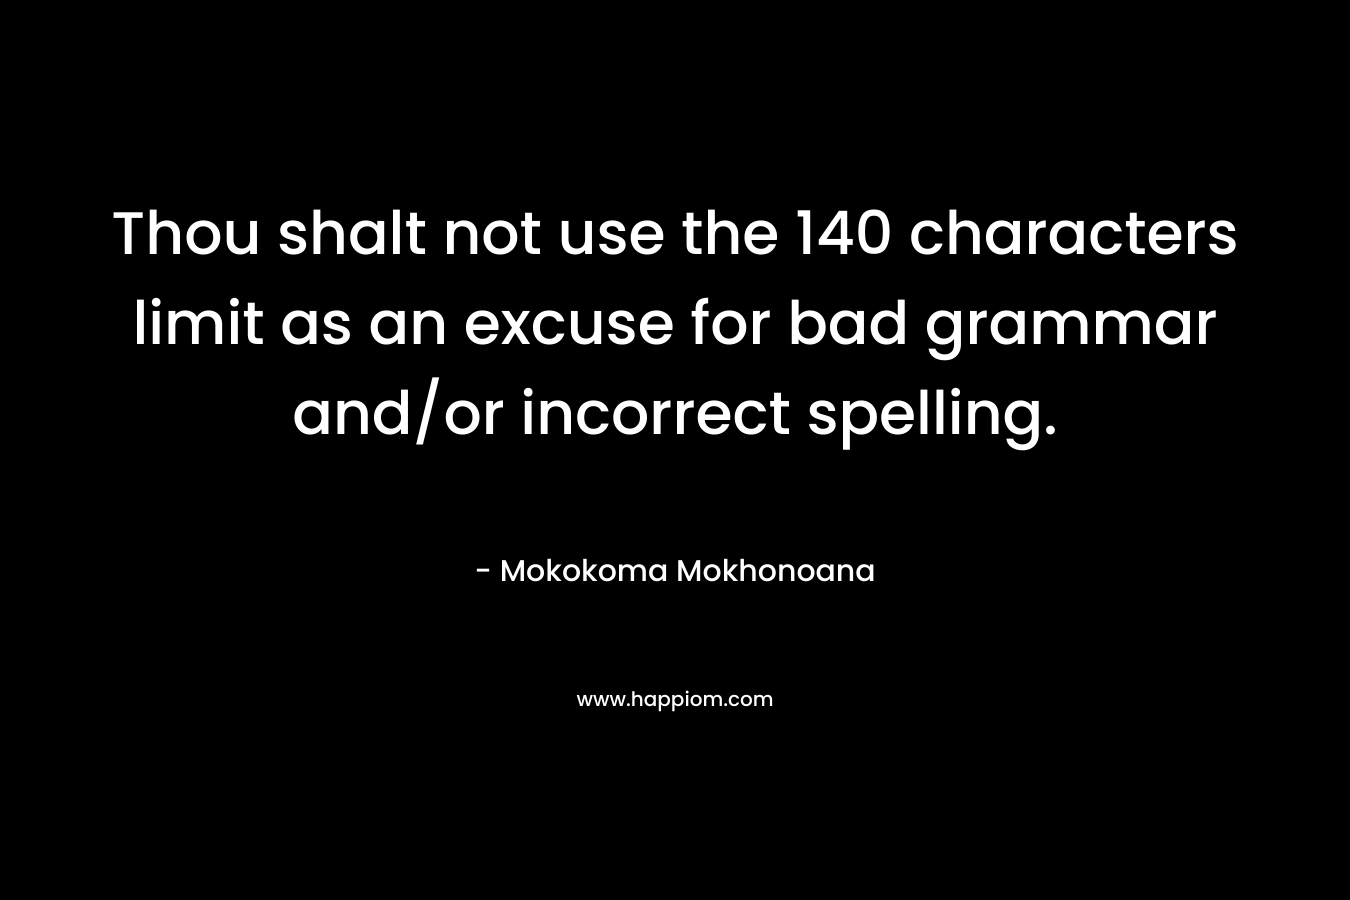 Thou shalt not use the 140 characters limit as an excuse for bad grammar and/or incorrect spelling. – Mokokoma Mokhonoana